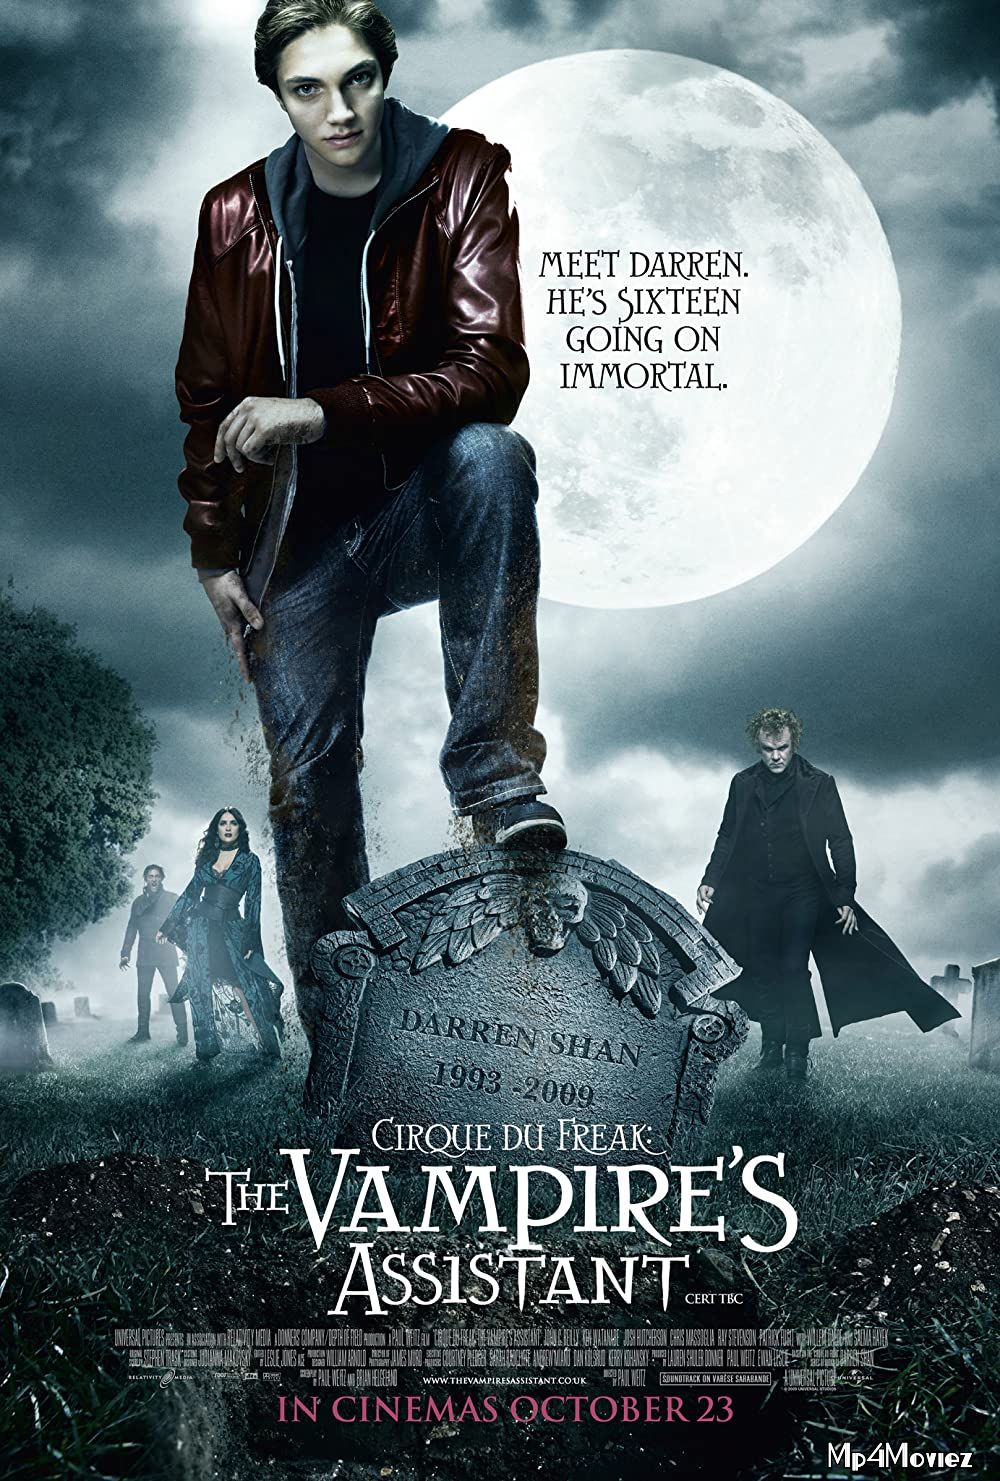 Cirque du Freak The Vampires Assistant (2009) Hindi Dubbed BluRay download full movie